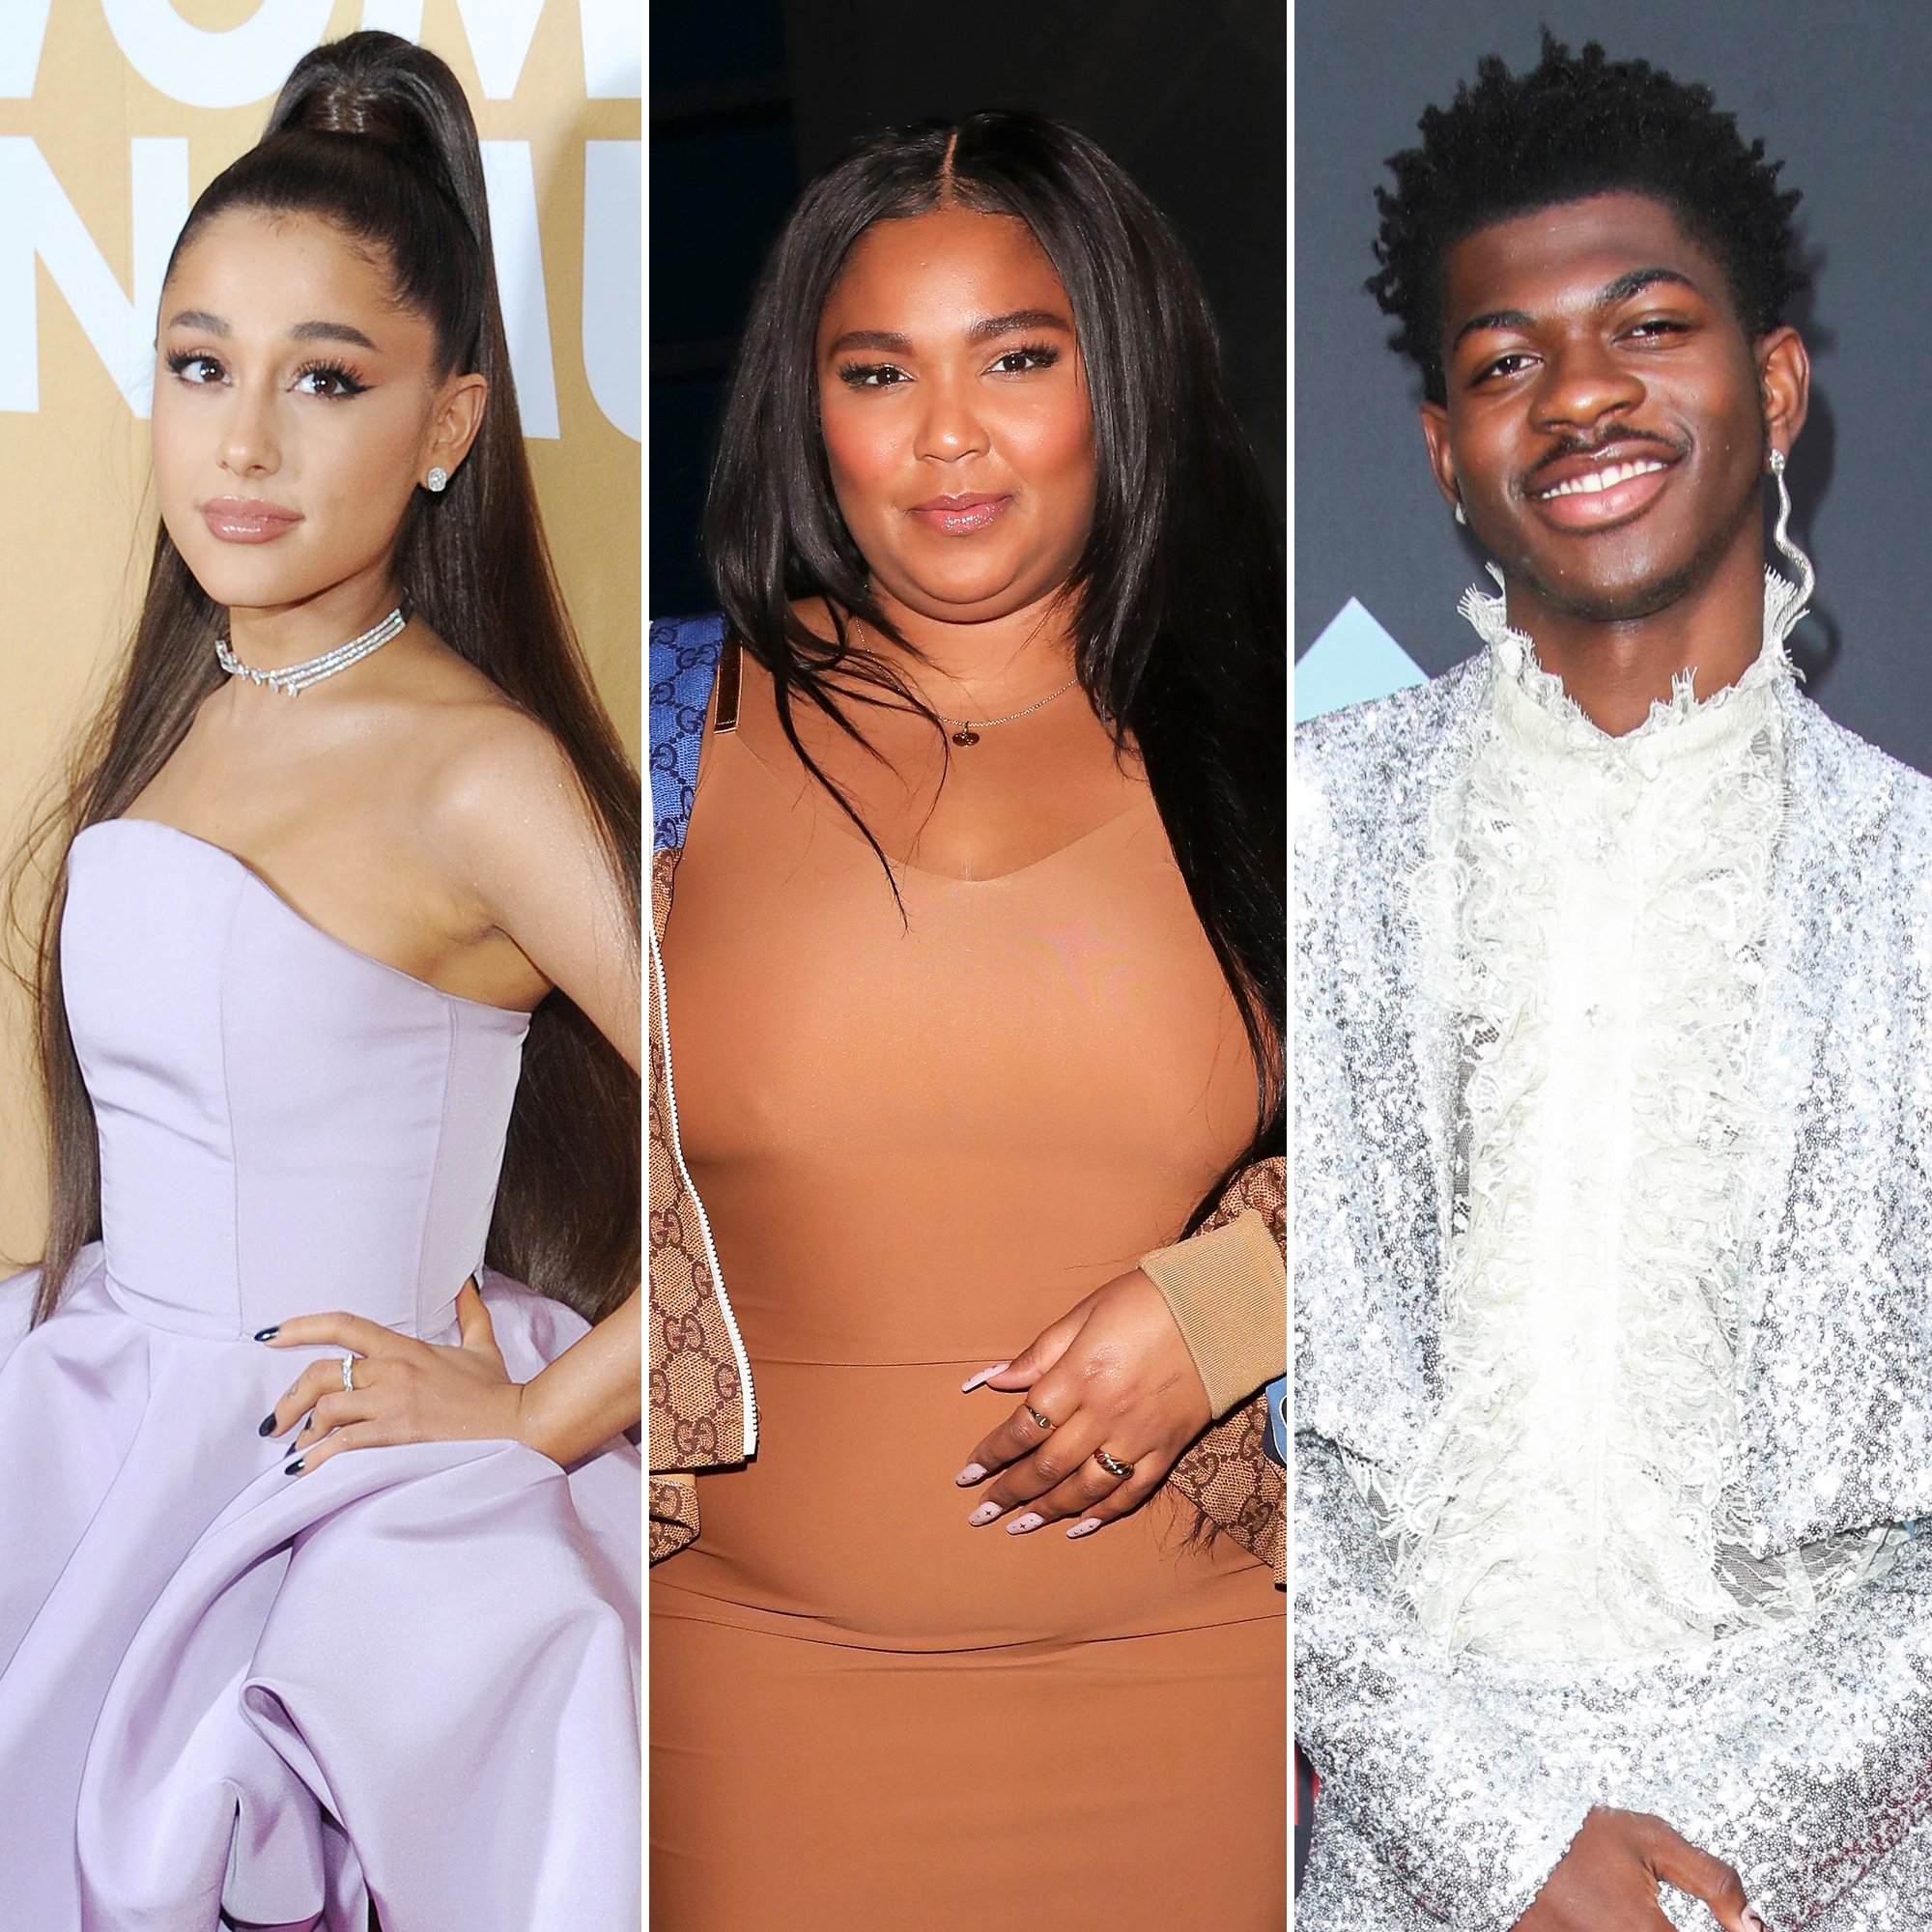 Ariana Porn Compilation - Grammy Nominations 2020: Ariana Grande, Lizzo and More Nominated